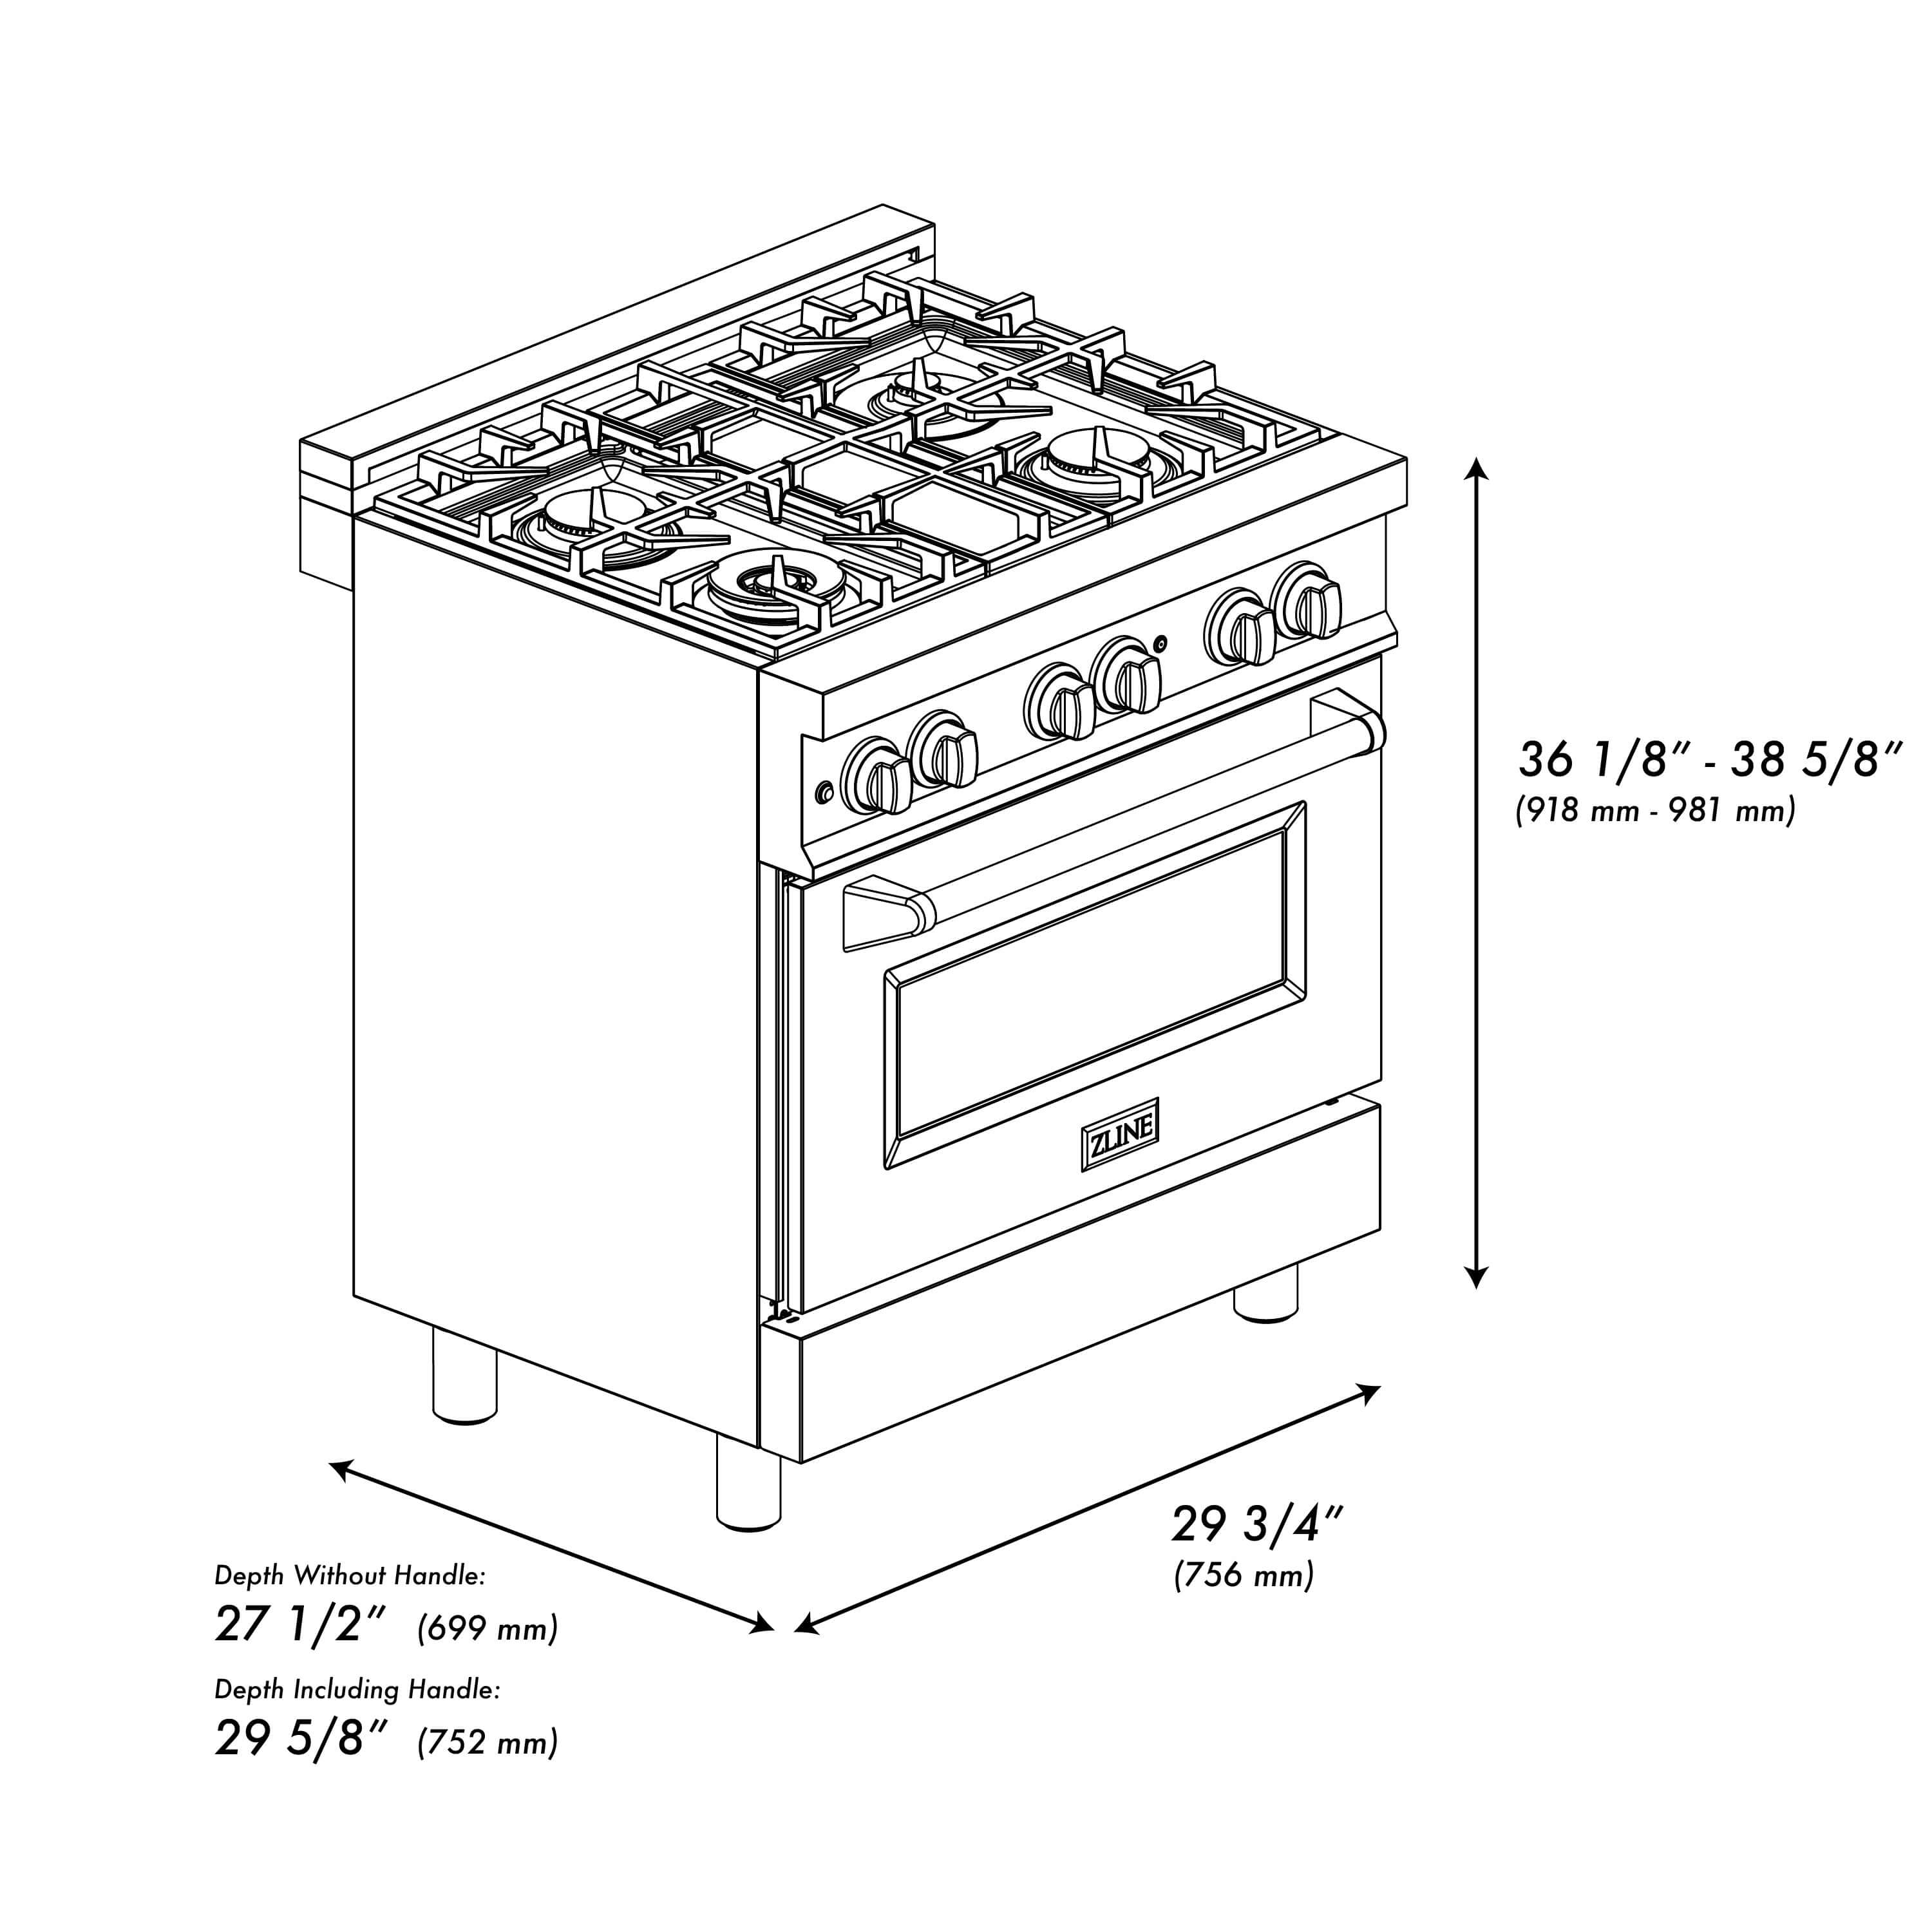 ZLINE 30 in. 4.0 cu. ft. Dual Fuel Range with Gas Stove and Electric Oven in Fingerprint Resistant Stainless Steel (RA-SN-30) dimensional diagram with measurements.